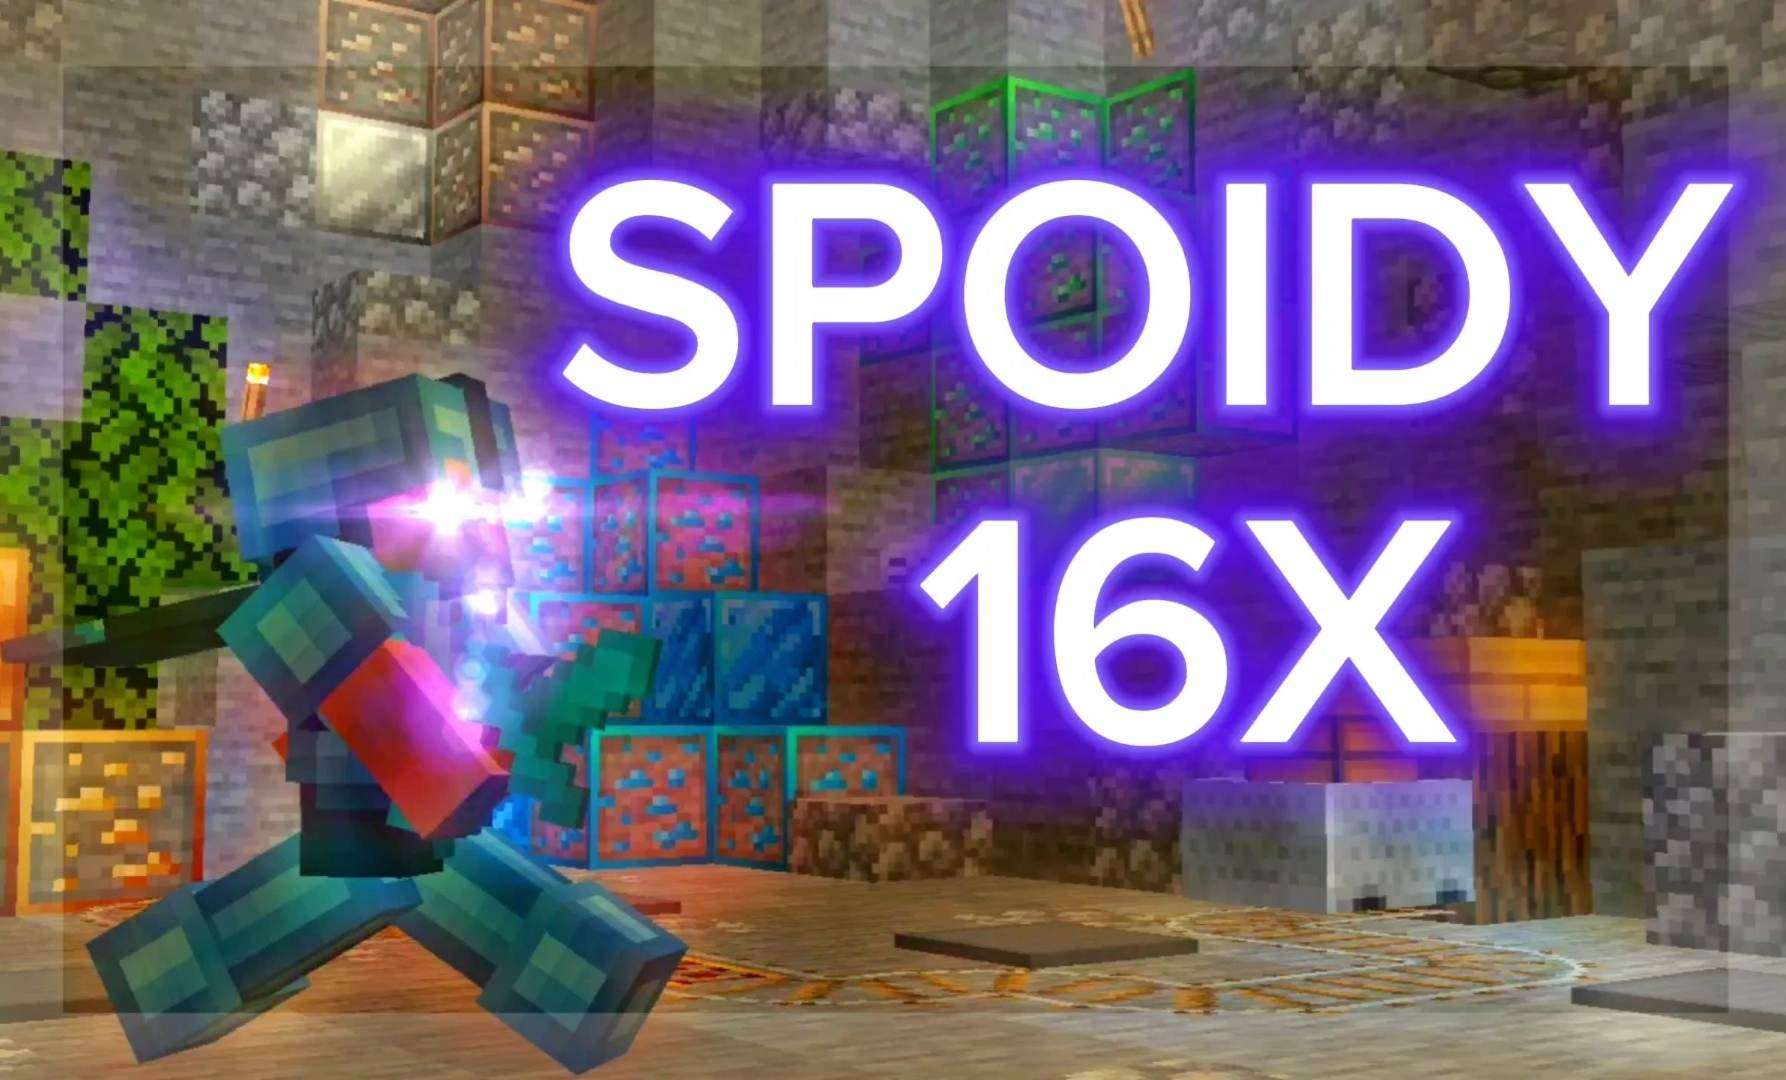 Spoidy  16x by Spoidyy on PvPRP